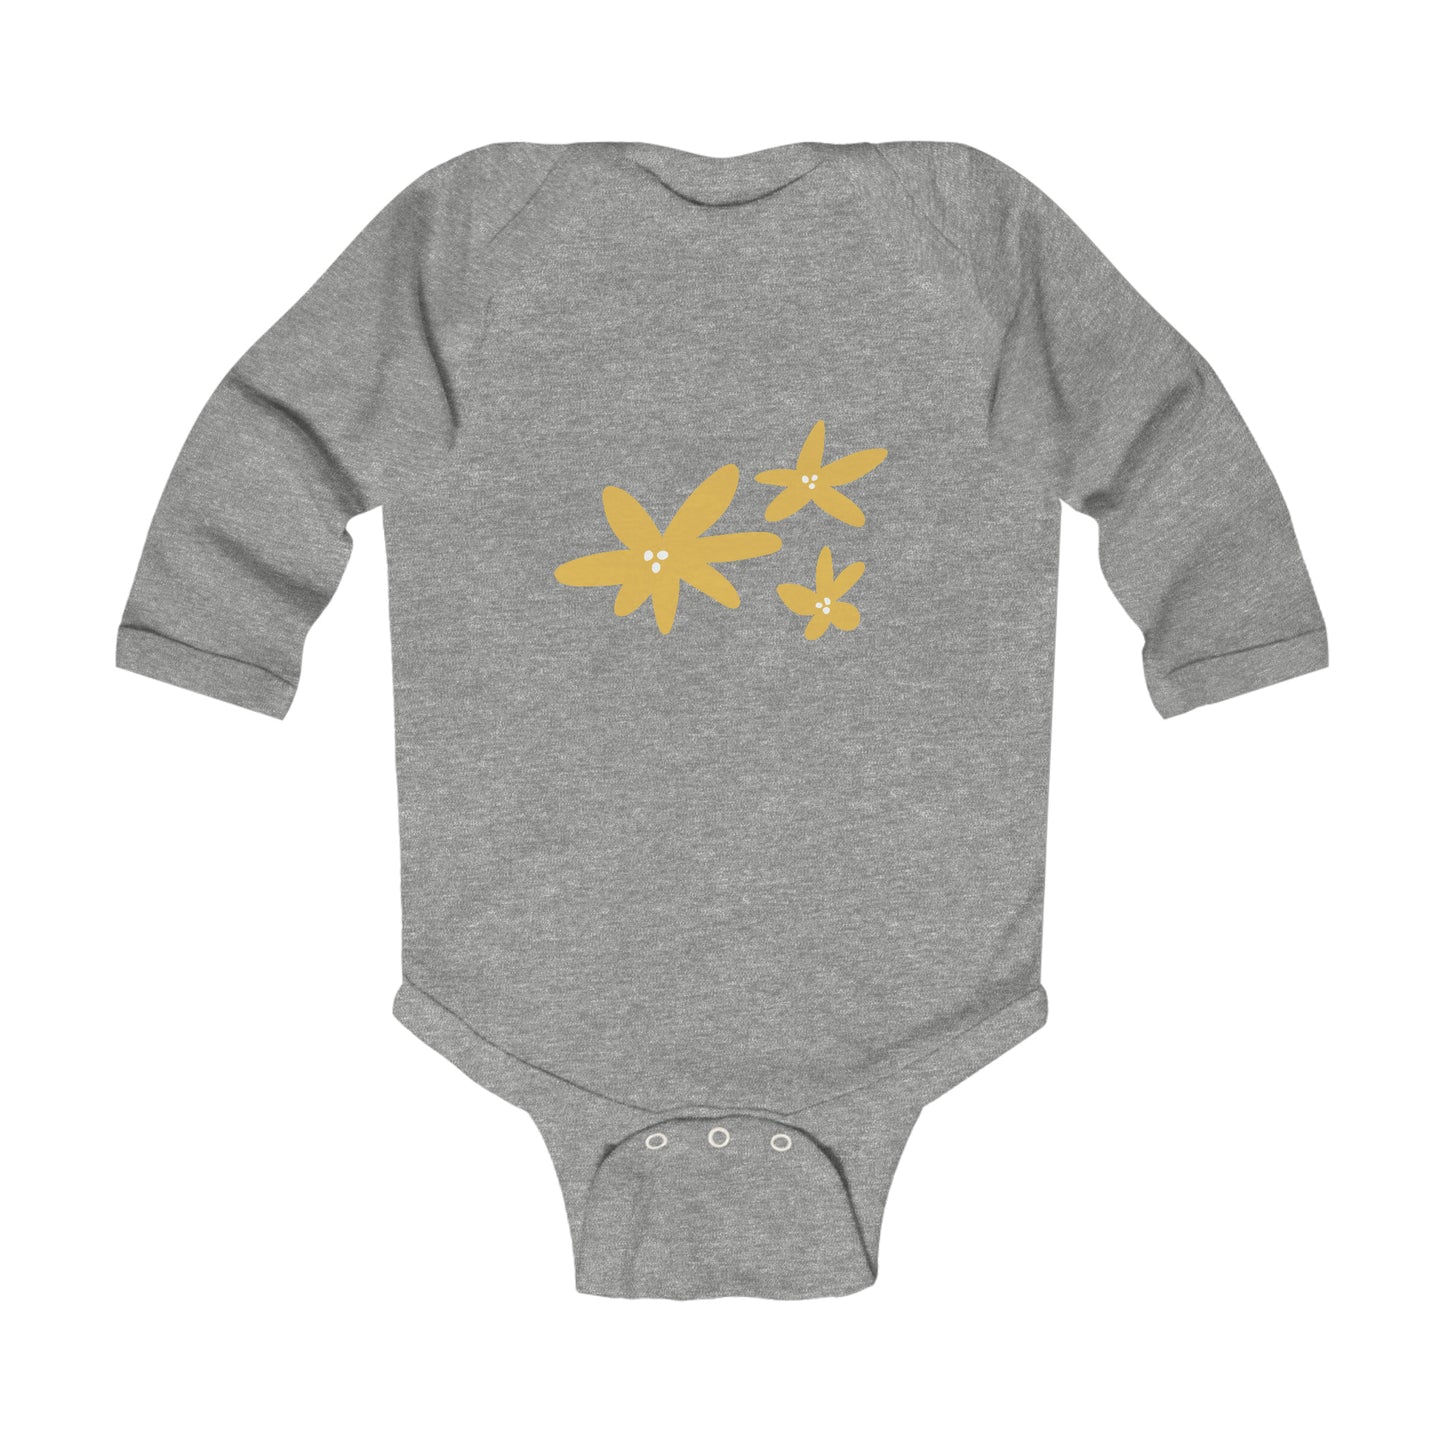 Three Yellow Flowers - Infant Long Sleeve Bodysuit ~ Sharon Dawn Collection